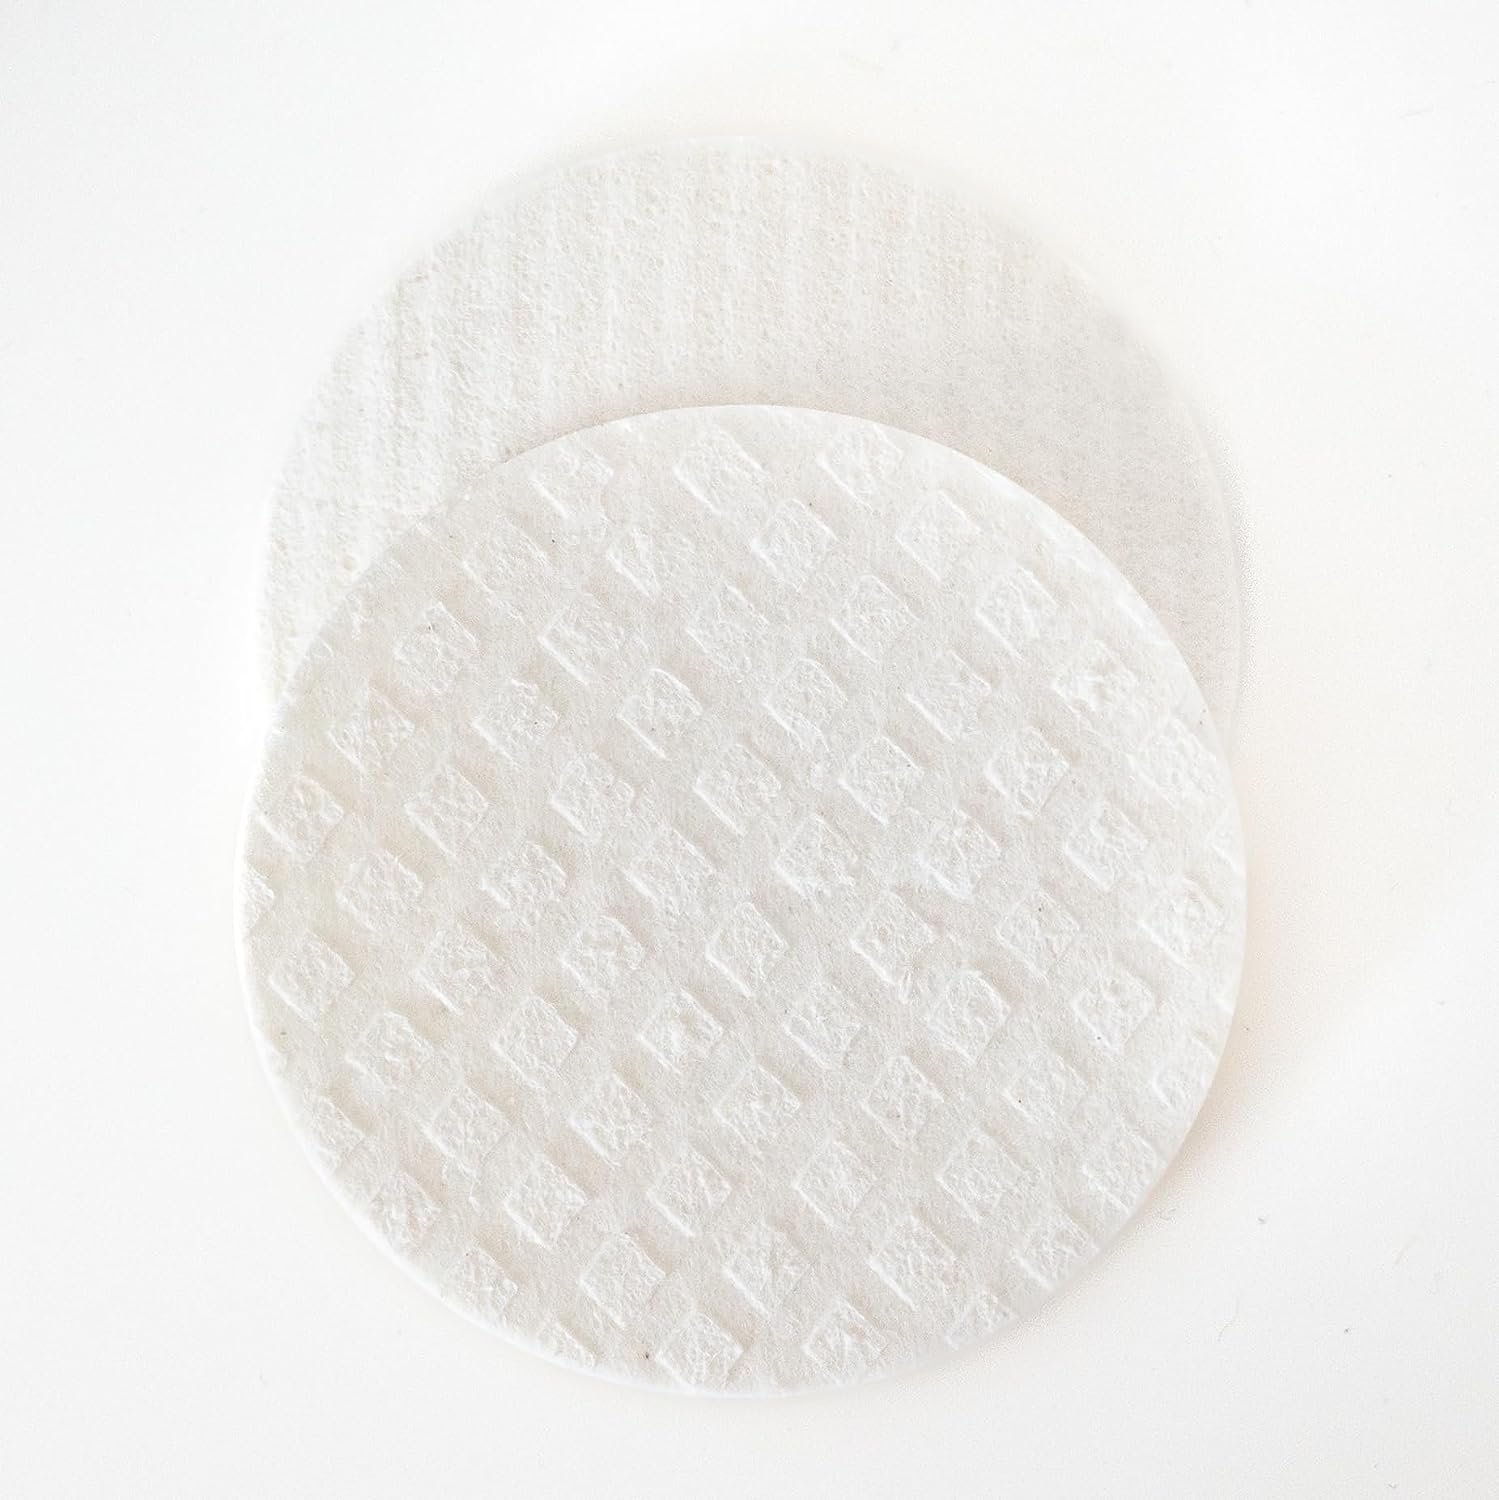 Chinchilla® Reusable make-up pads, set of 2 for storage, washable up to 90 degrees, made in Germany, suitable for all skin types, compostable and vegan